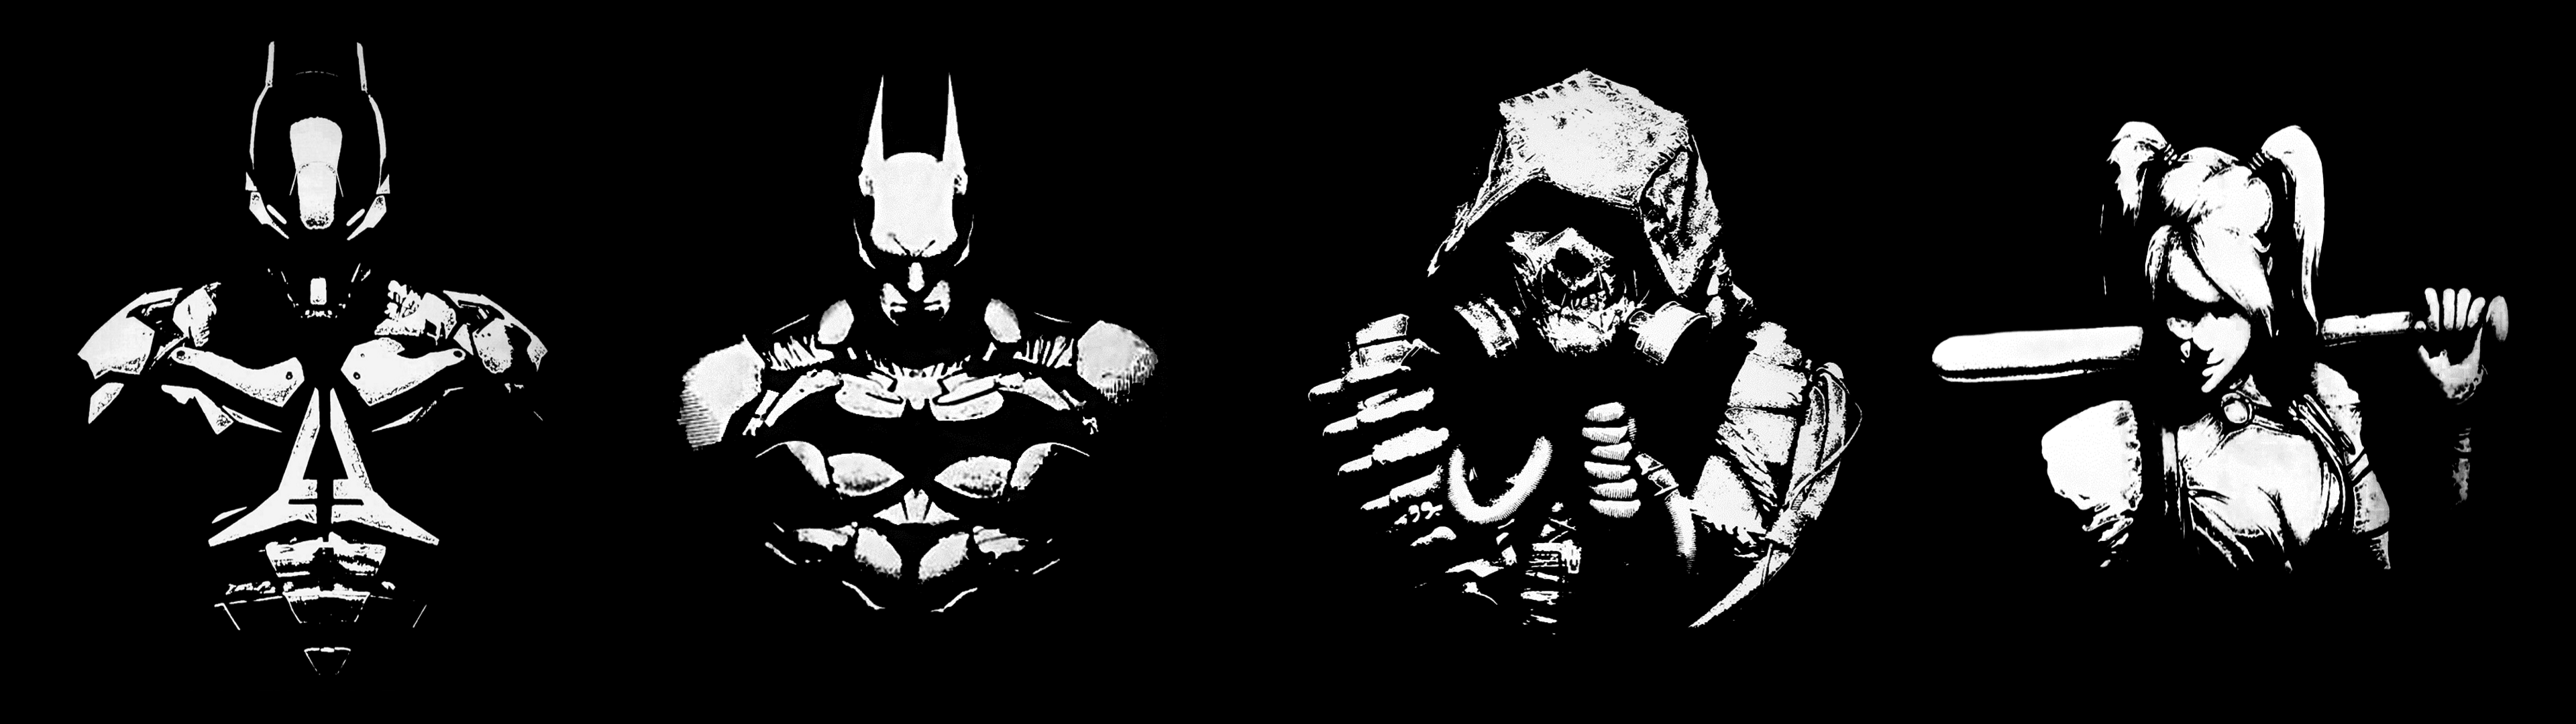 3840x1080] I edited four Batman Arkham wallpapers into one for ...